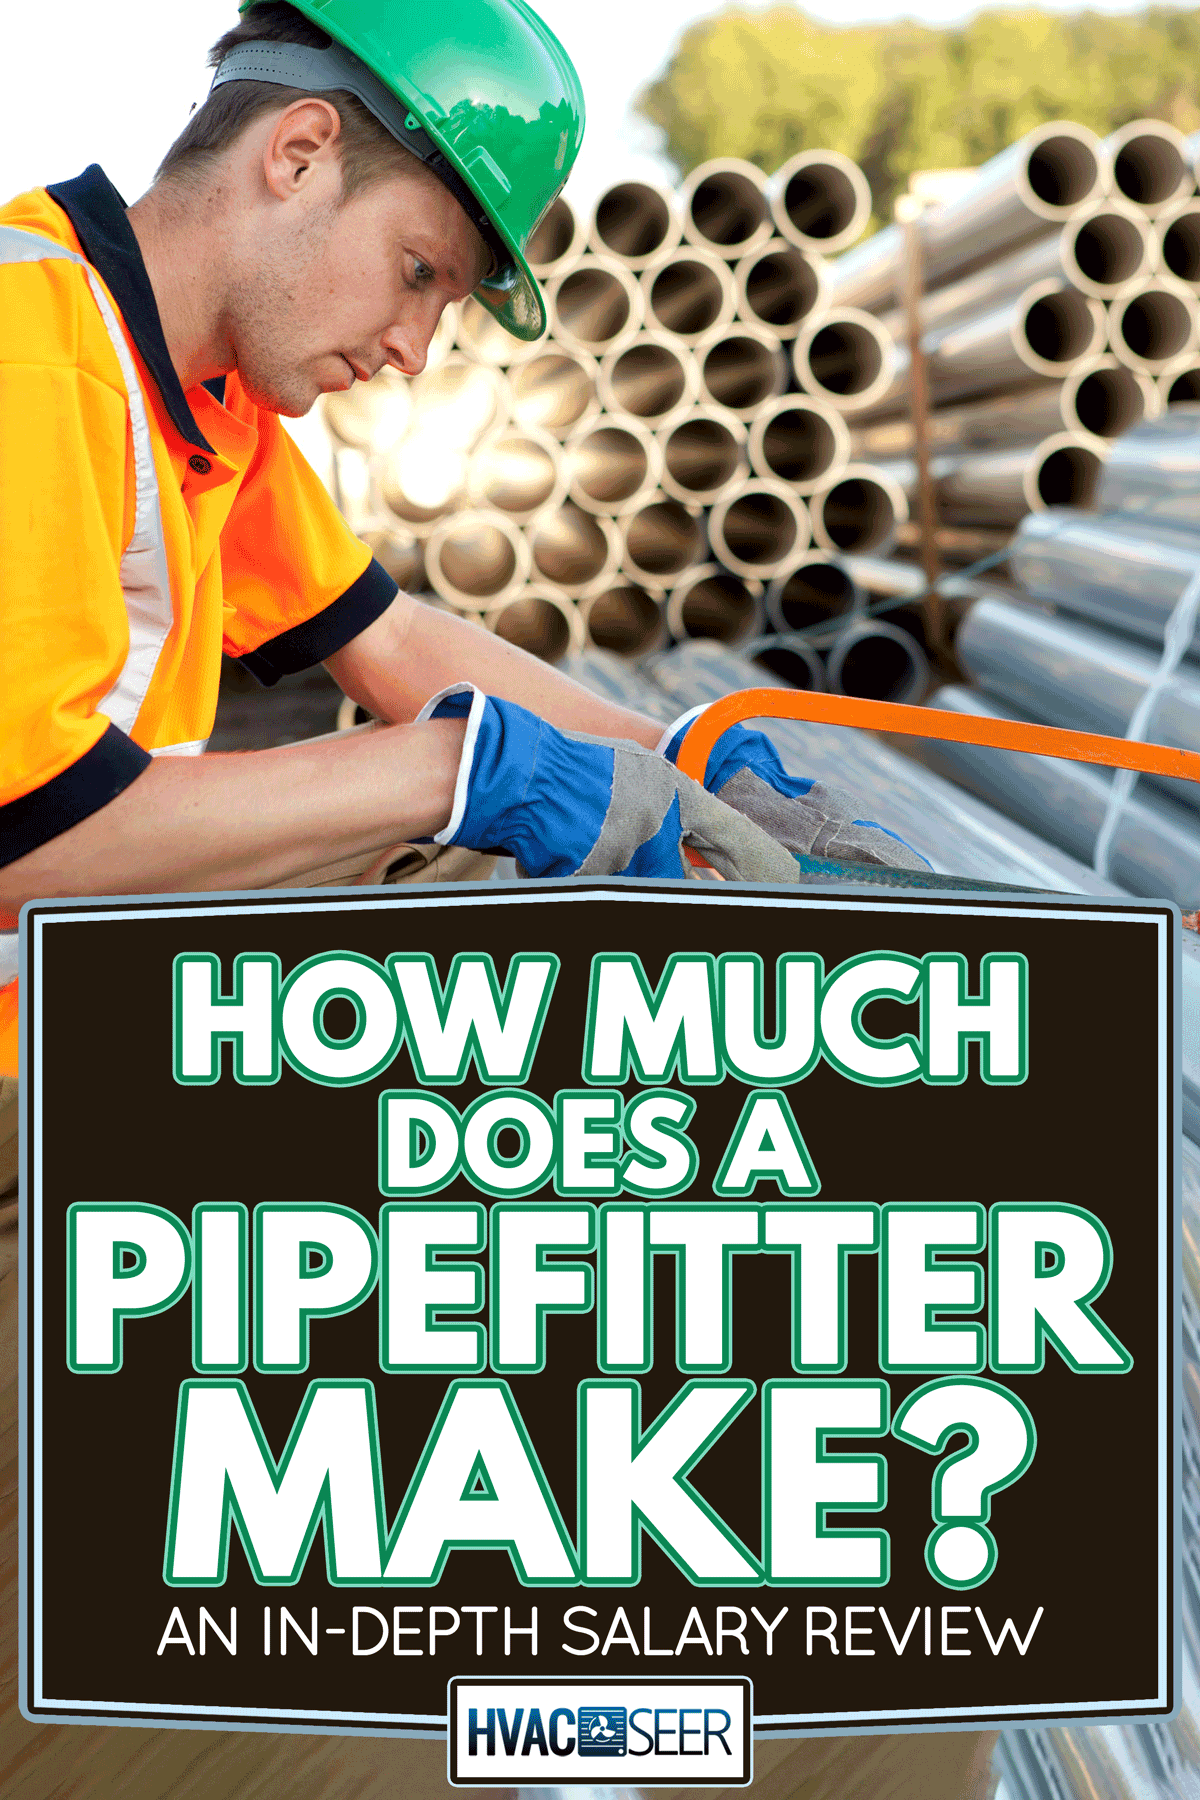 Pipefitter at work with PVC pipes, How Much Does A Pipefitter Make? [An In-Depth Salary Review]